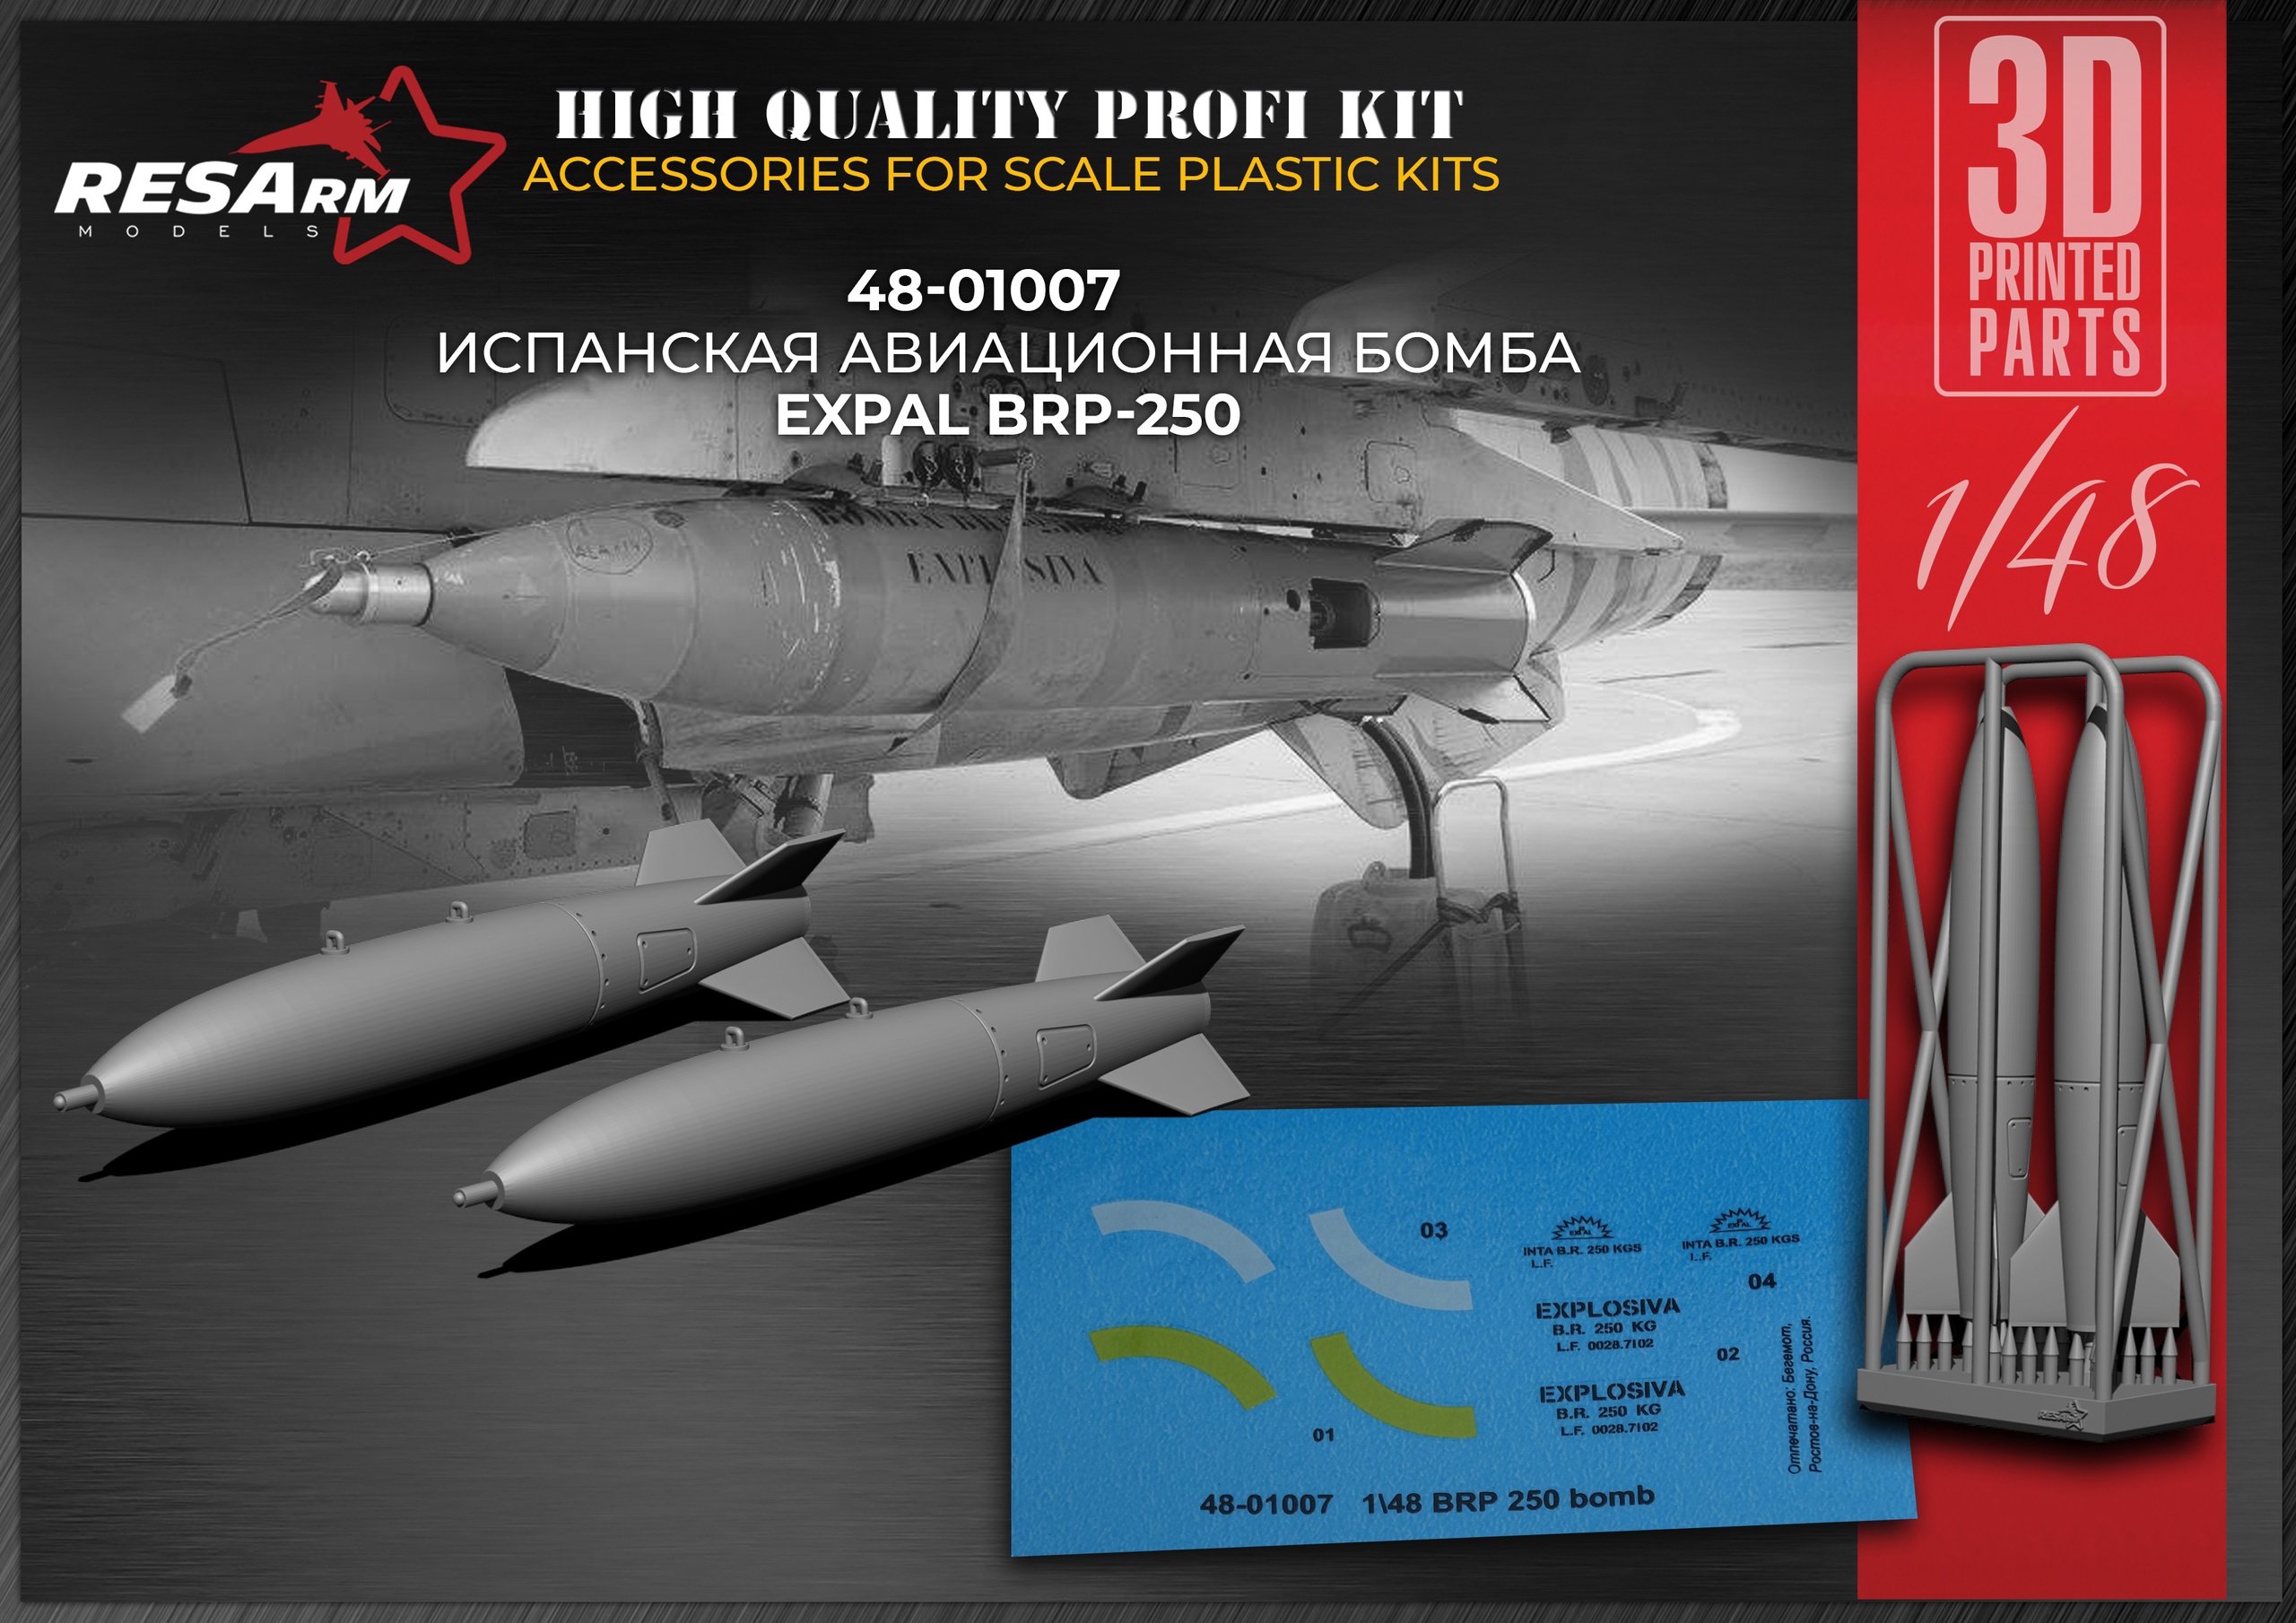 Additions (3D resin printing) 1/48 EXPAL BRP-250 - Spanish Aviation Bomb. (RESArm)